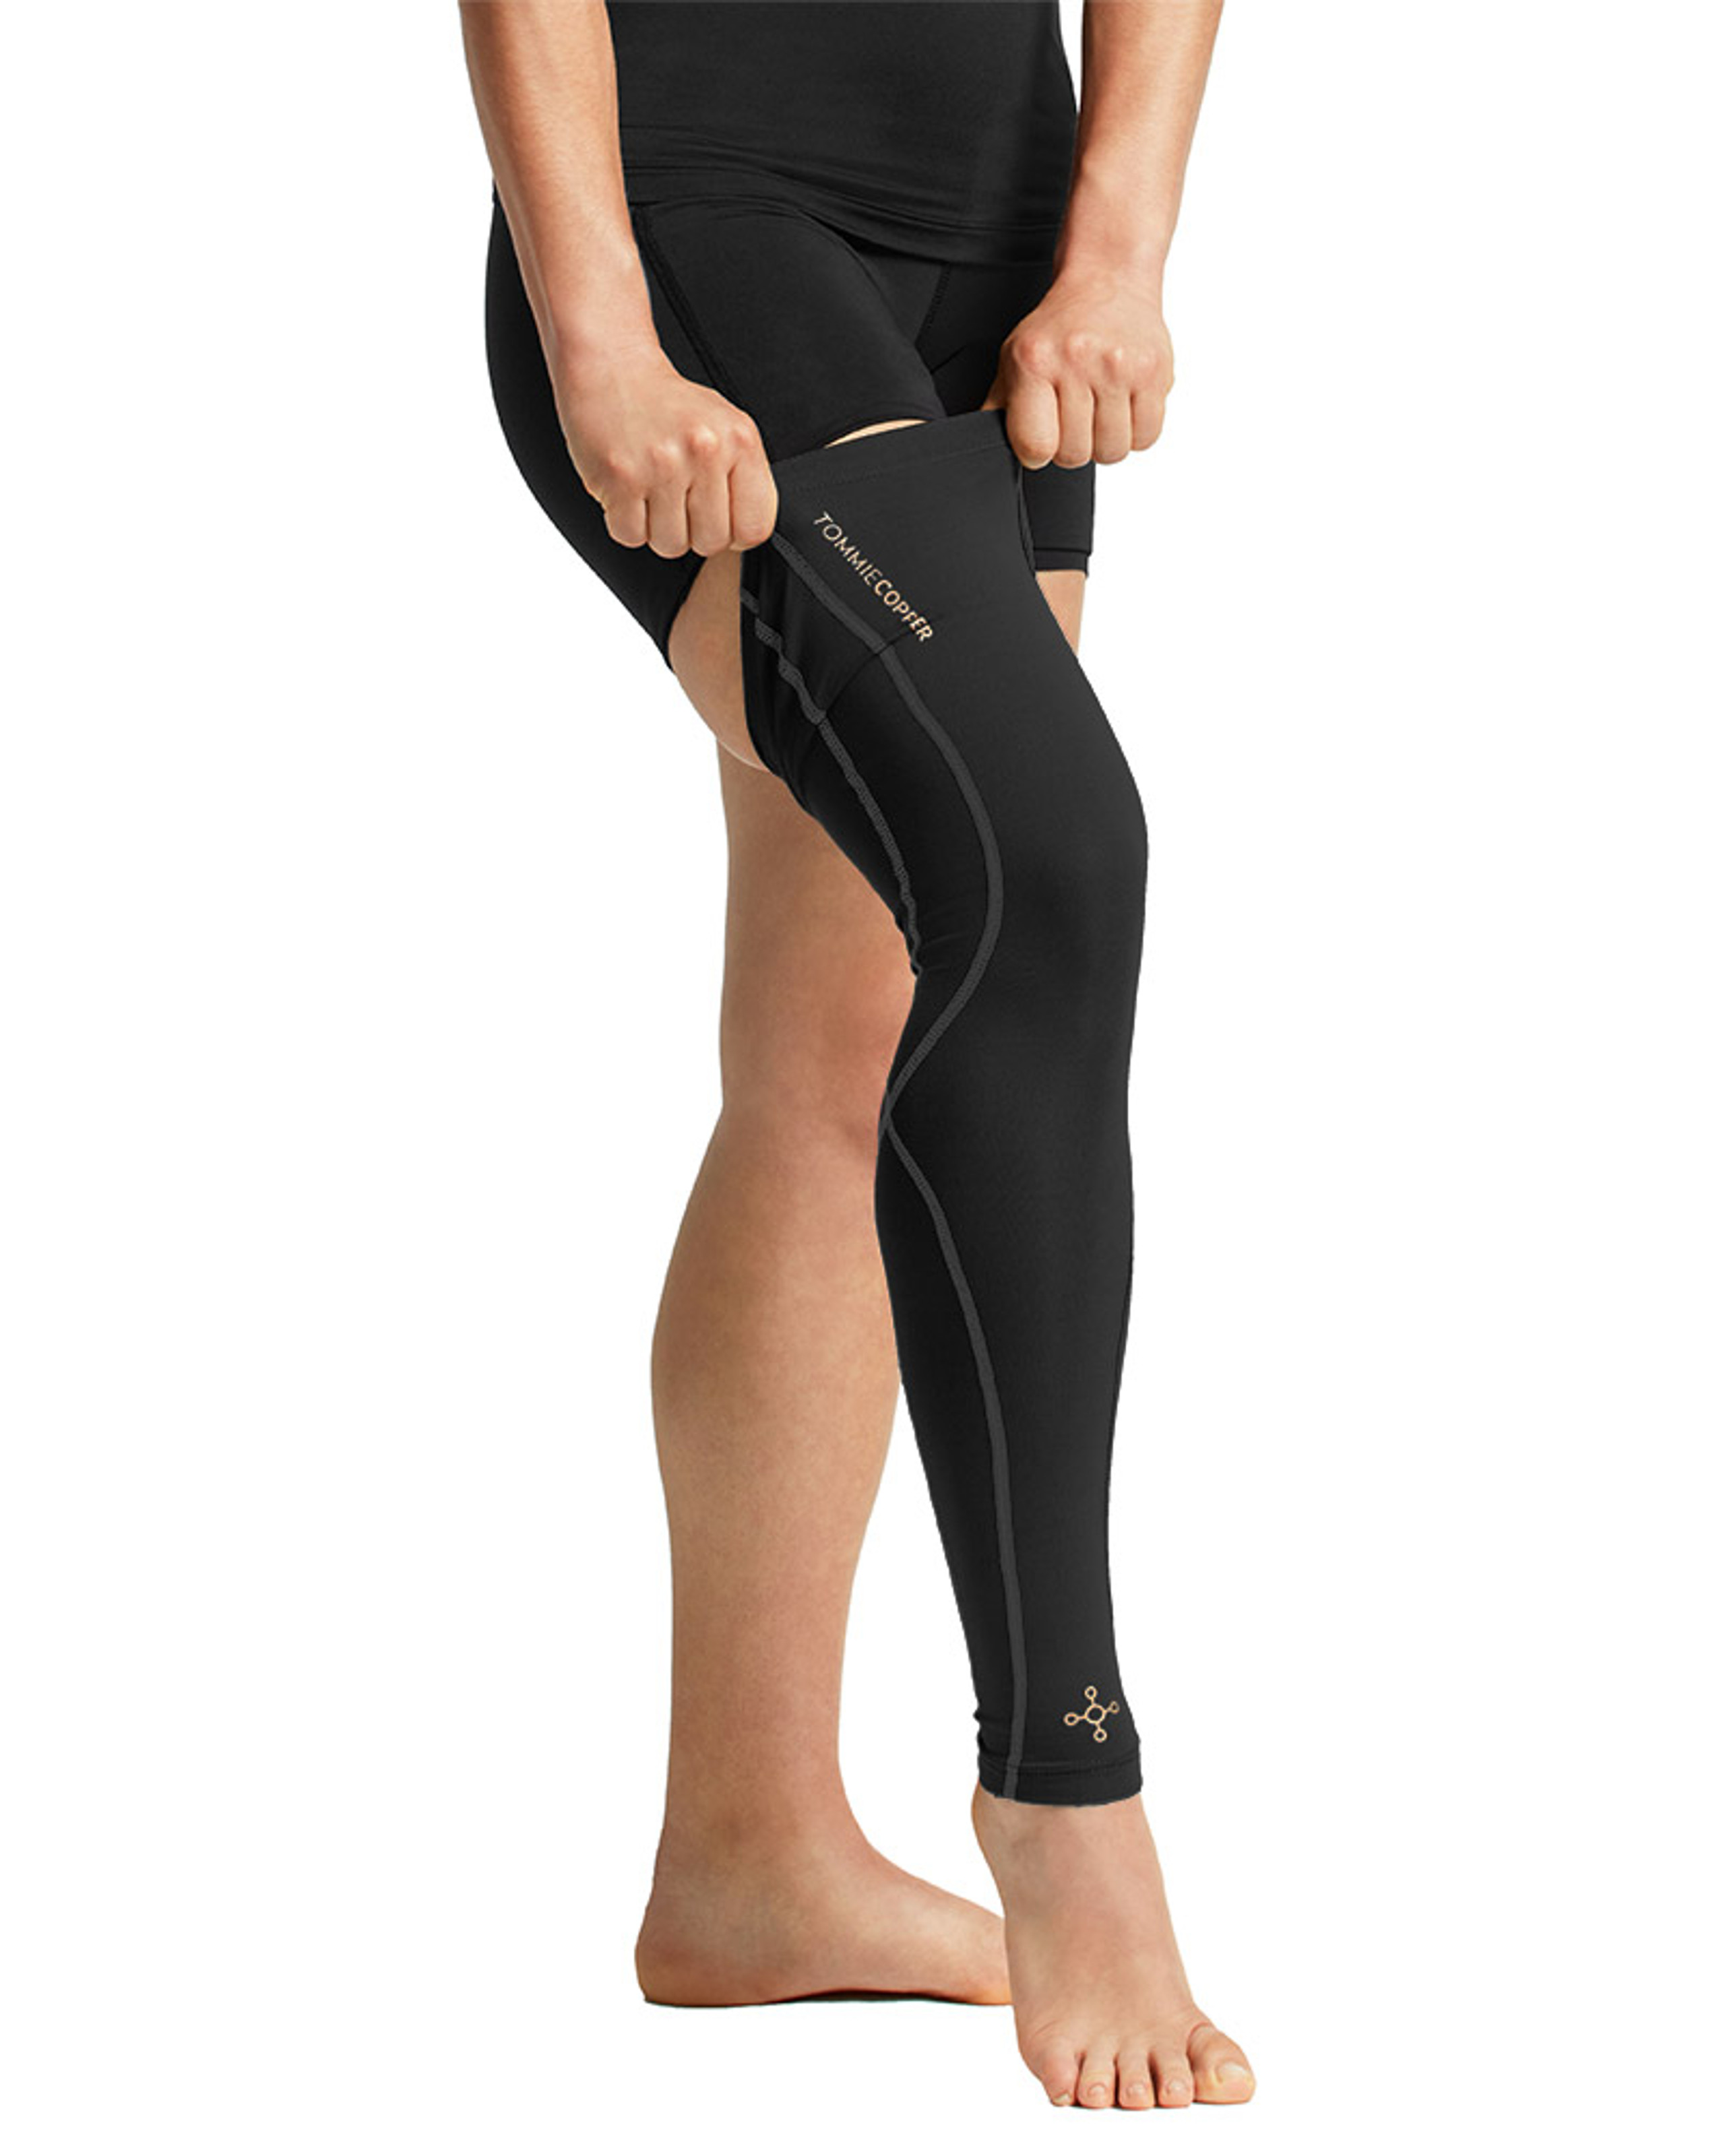 Women S Compression Full Leg Sleeve Tommie Copper®